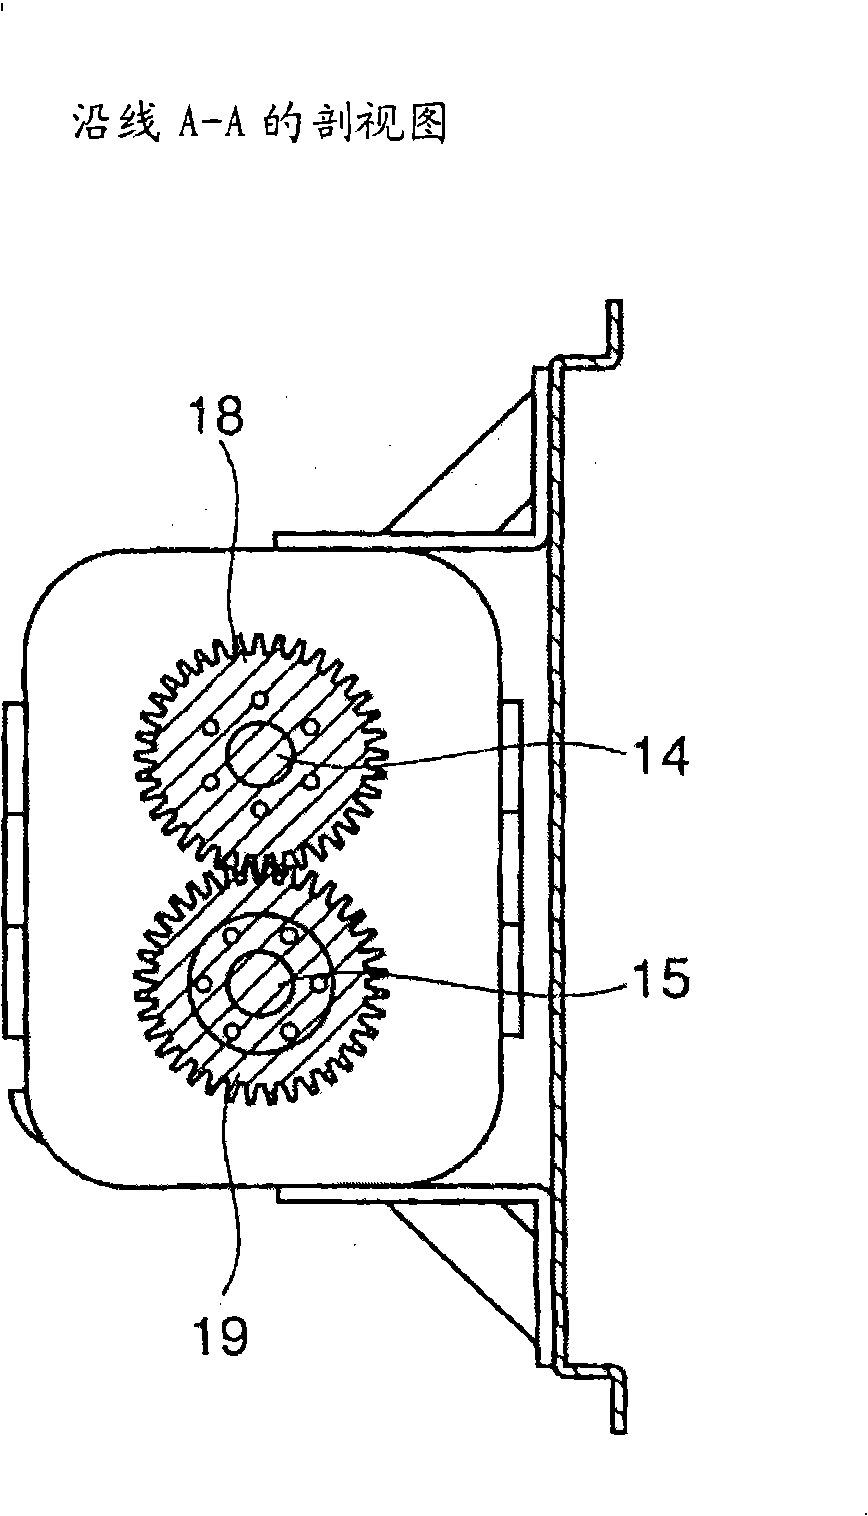 Oil-free fluid machine having two or more rotors